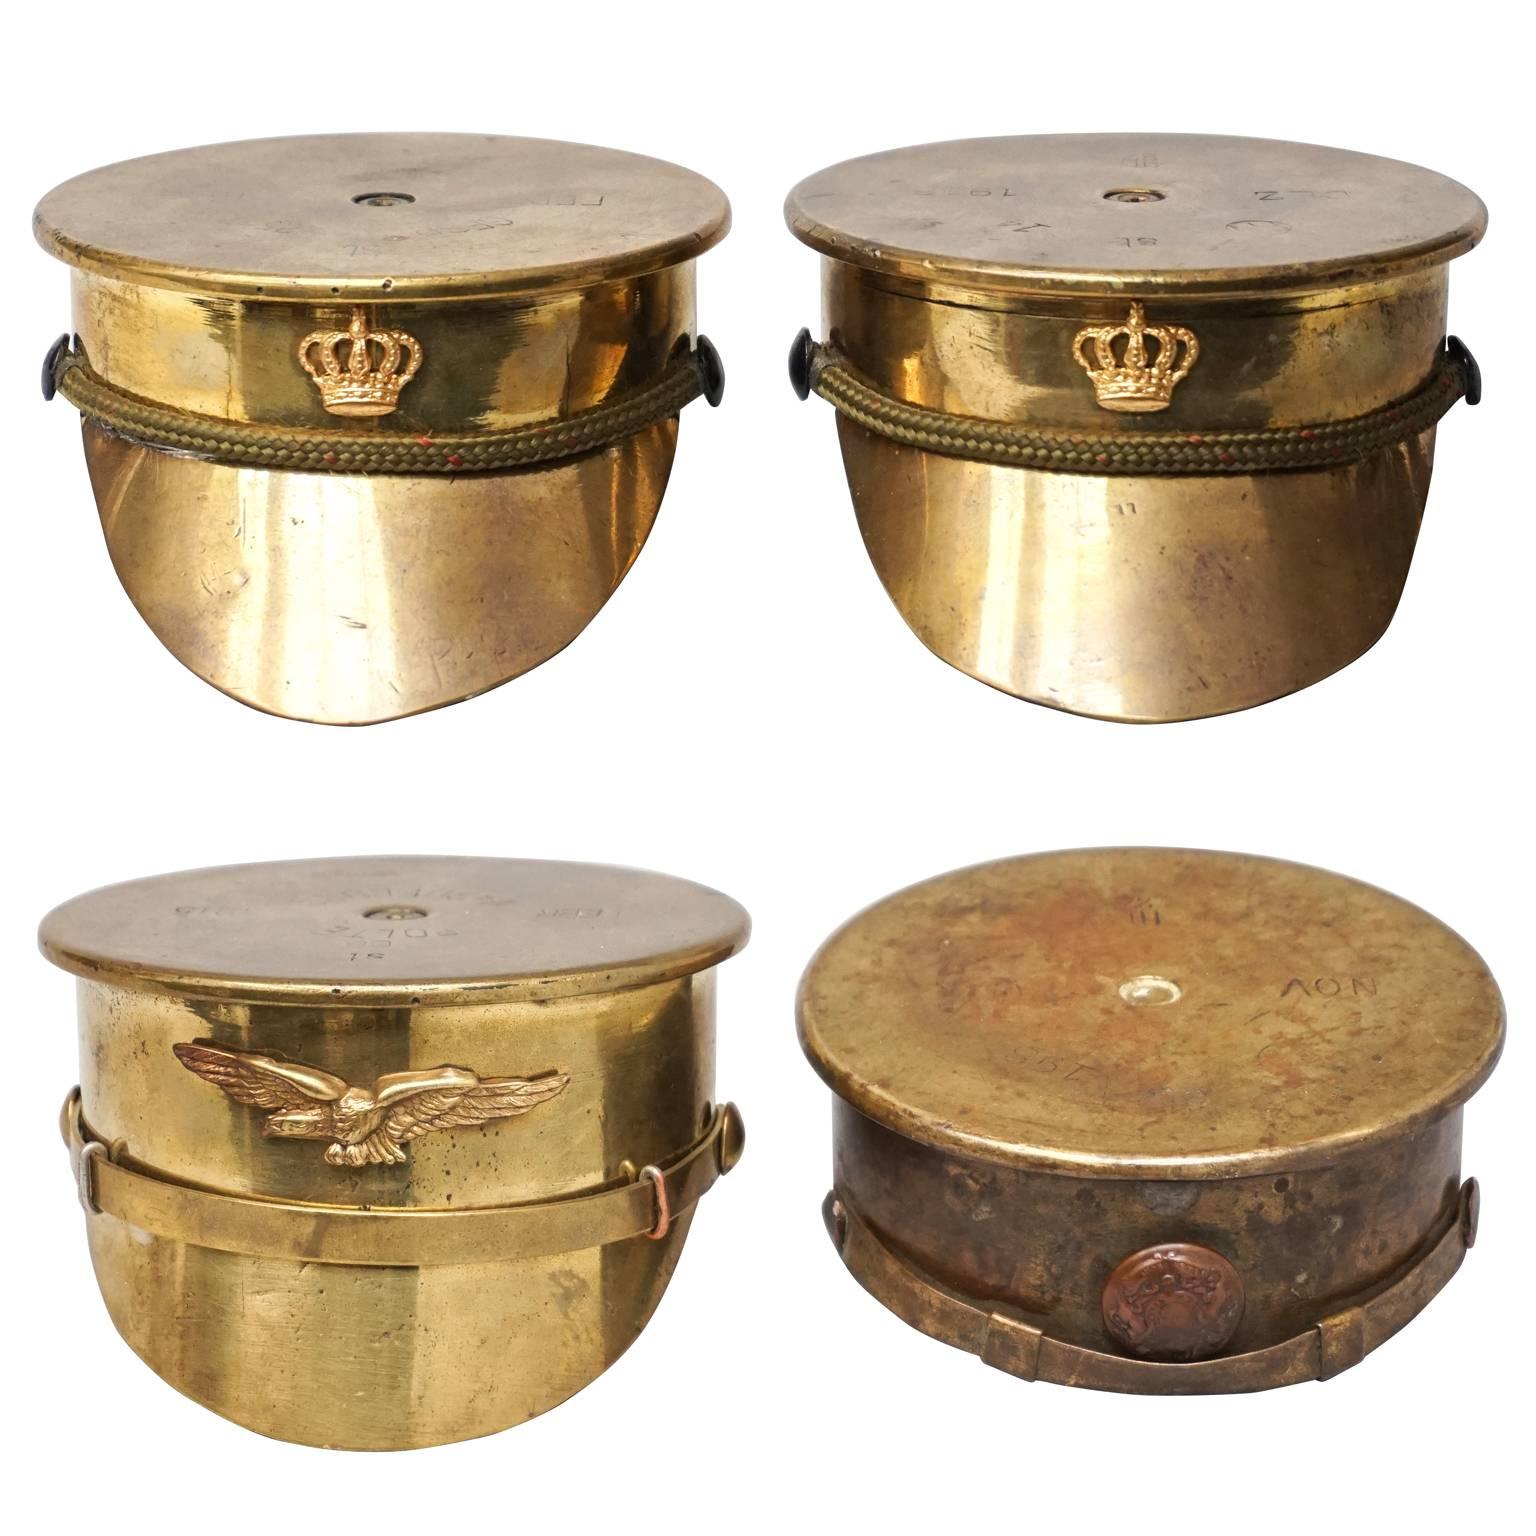 Collection of Four Brass 'Trench Art' Military Caps or Kepis WWI